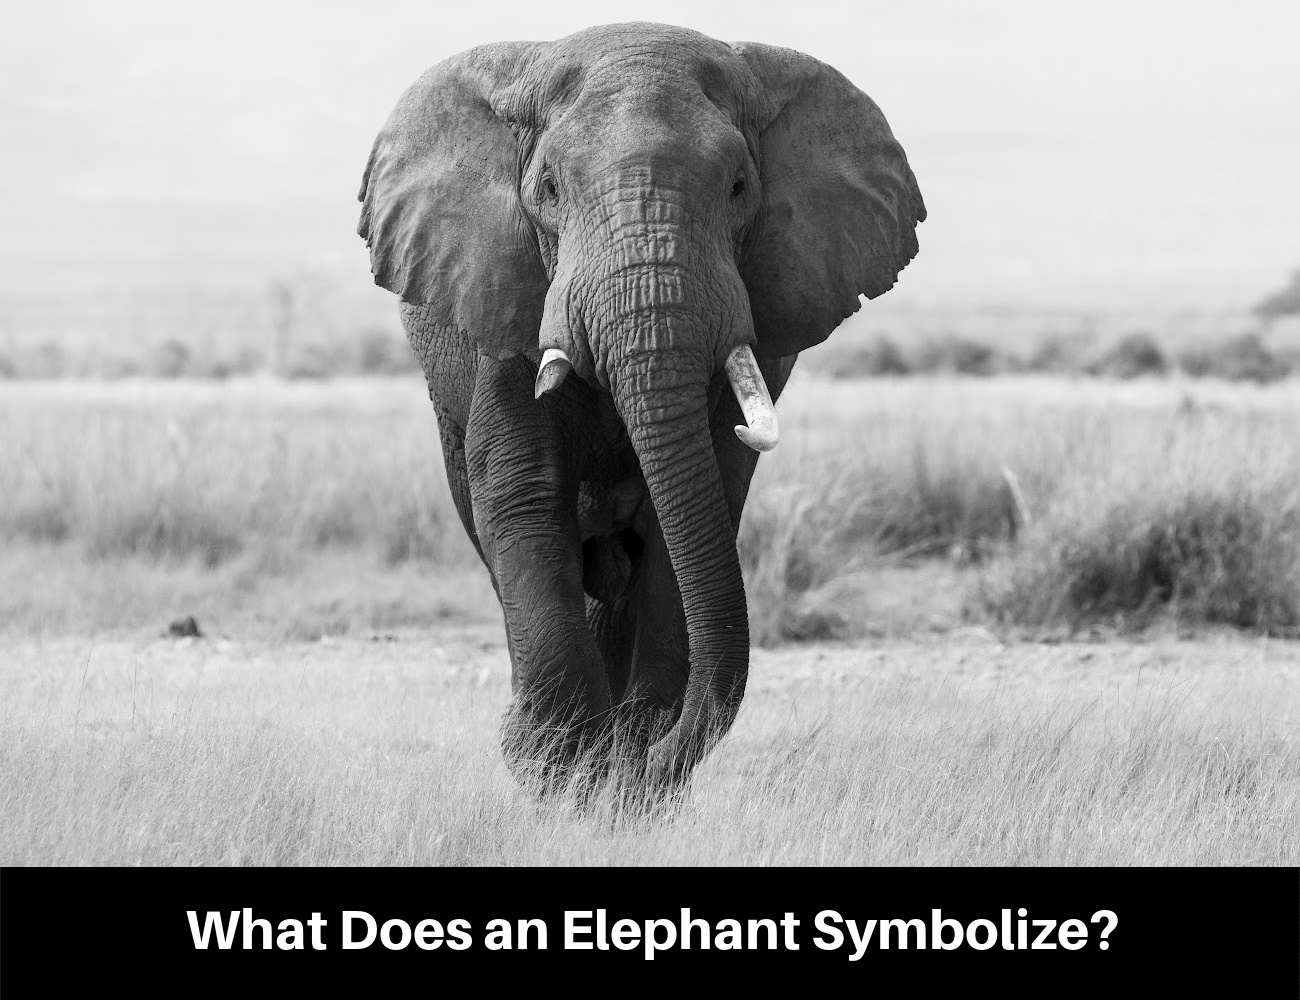 What Does an Elephant Symbolize?